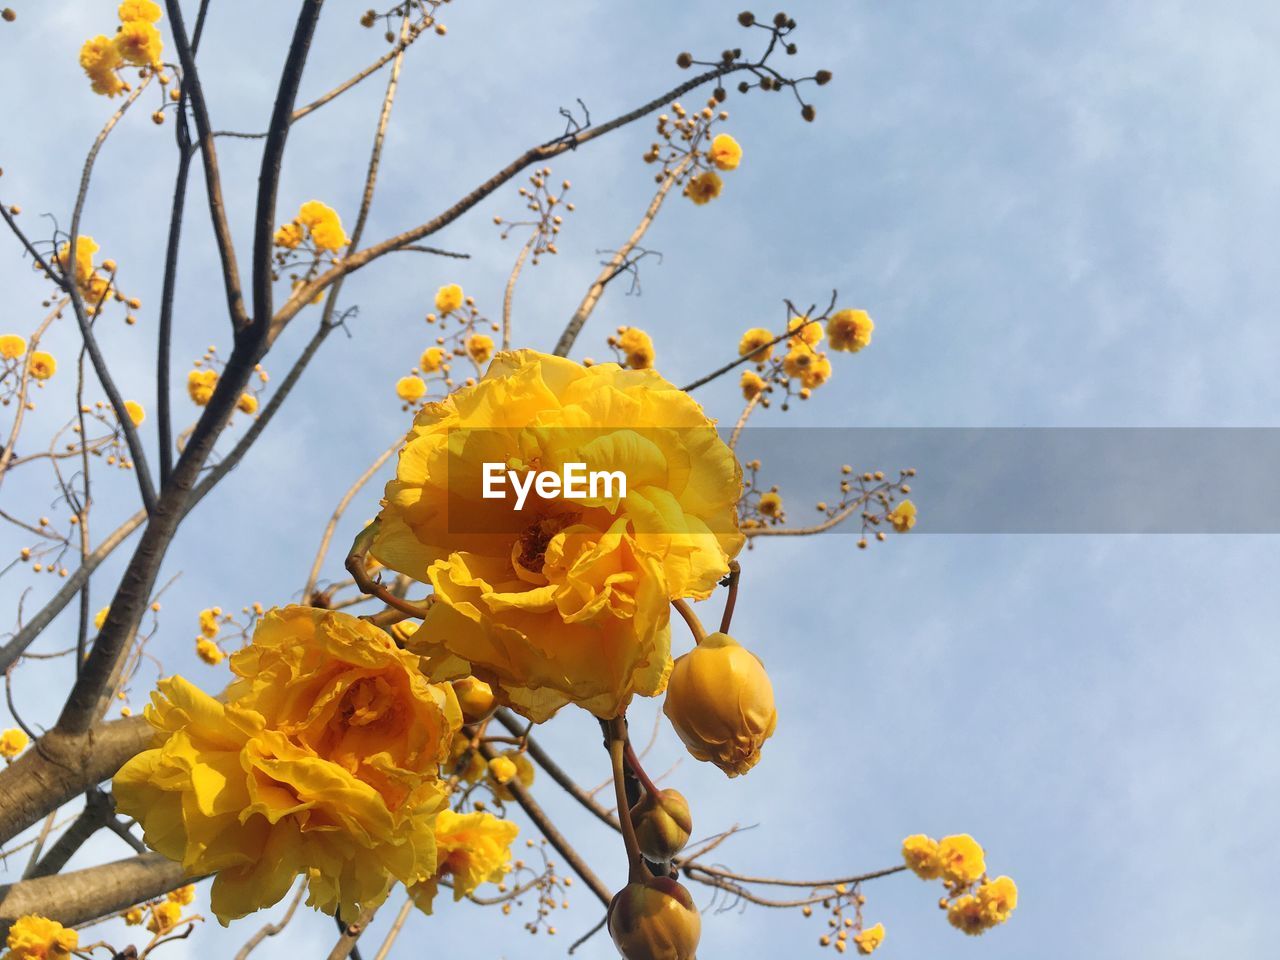 CLOSE-UP OF YELLOW FLOWERS AGAINST THE SKY